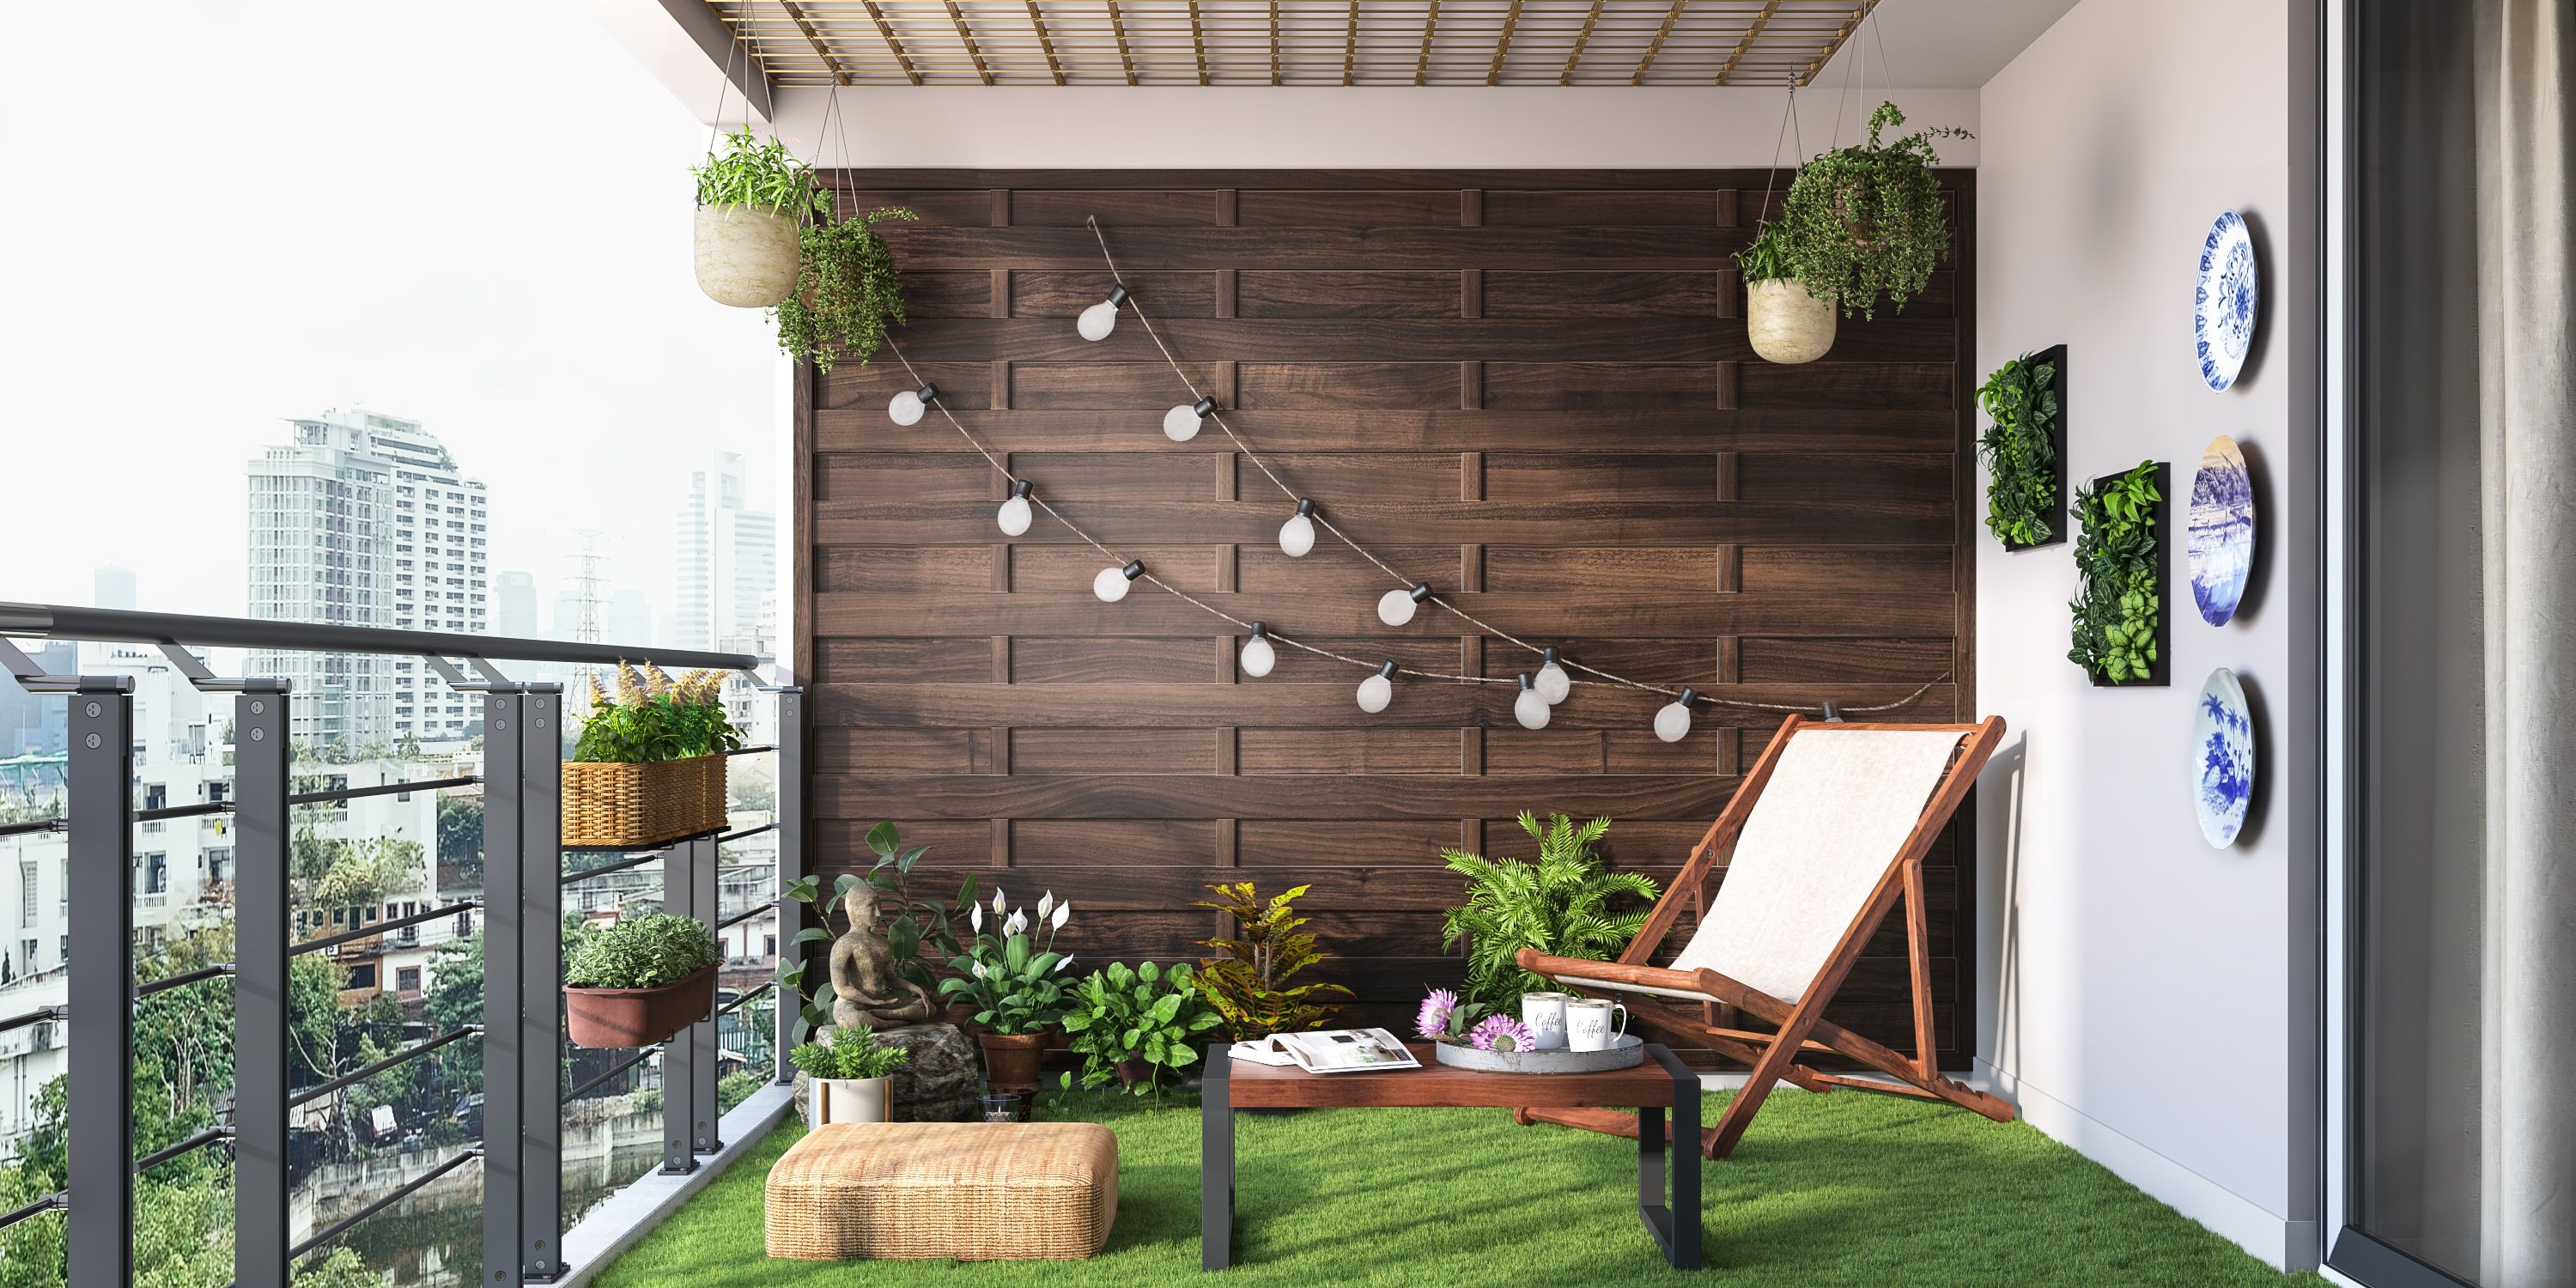 Simple Balcony With Grill Ceiling And Hanging Potted Plants